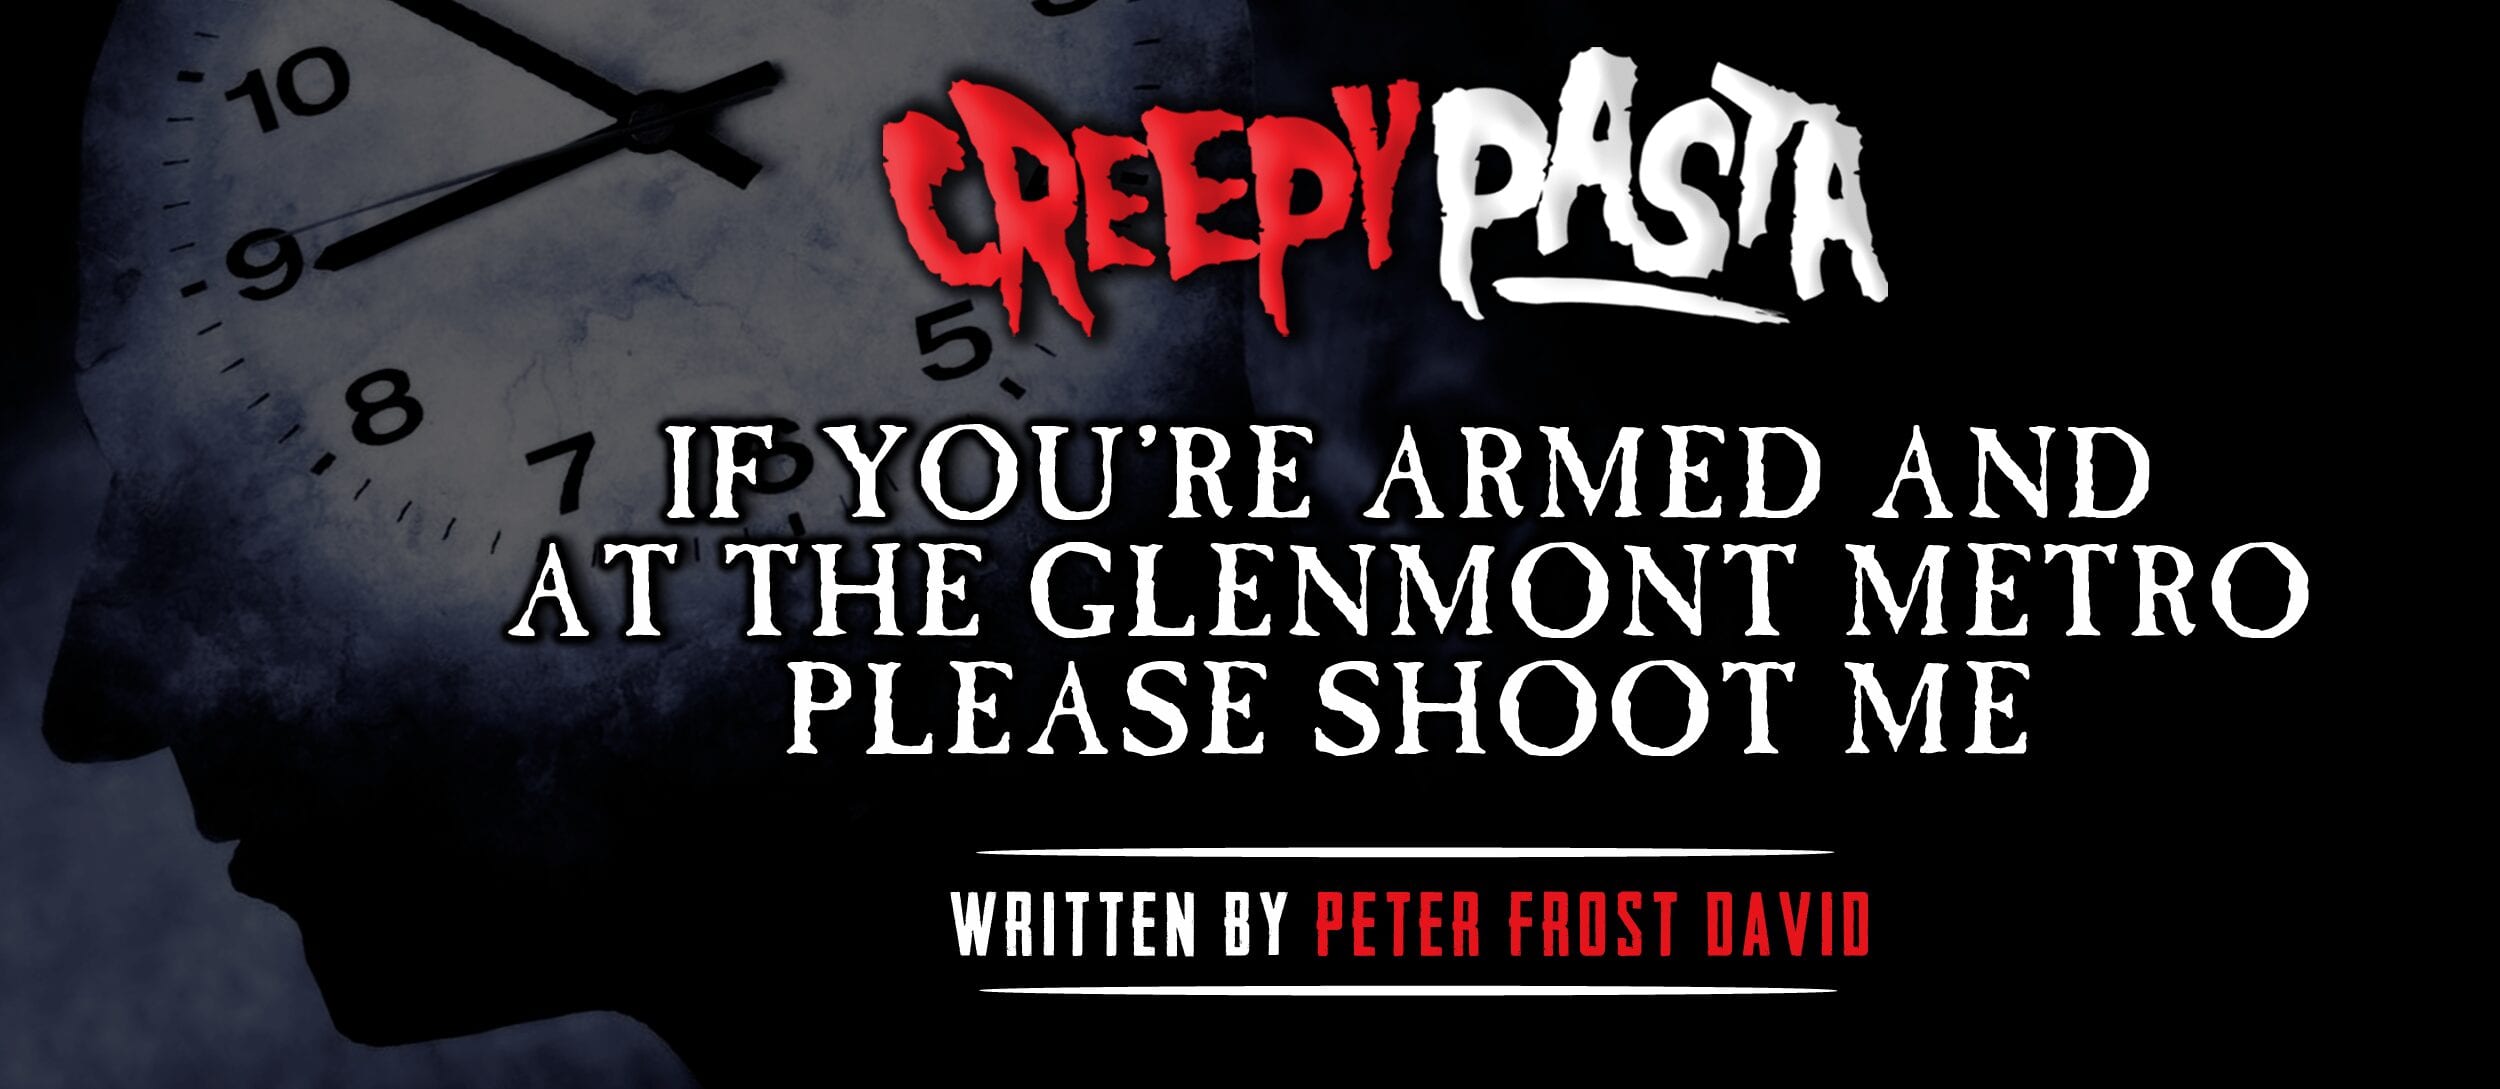 If You Re Armed And At The Glenmont Metro Please Shoot Me Creepypasta